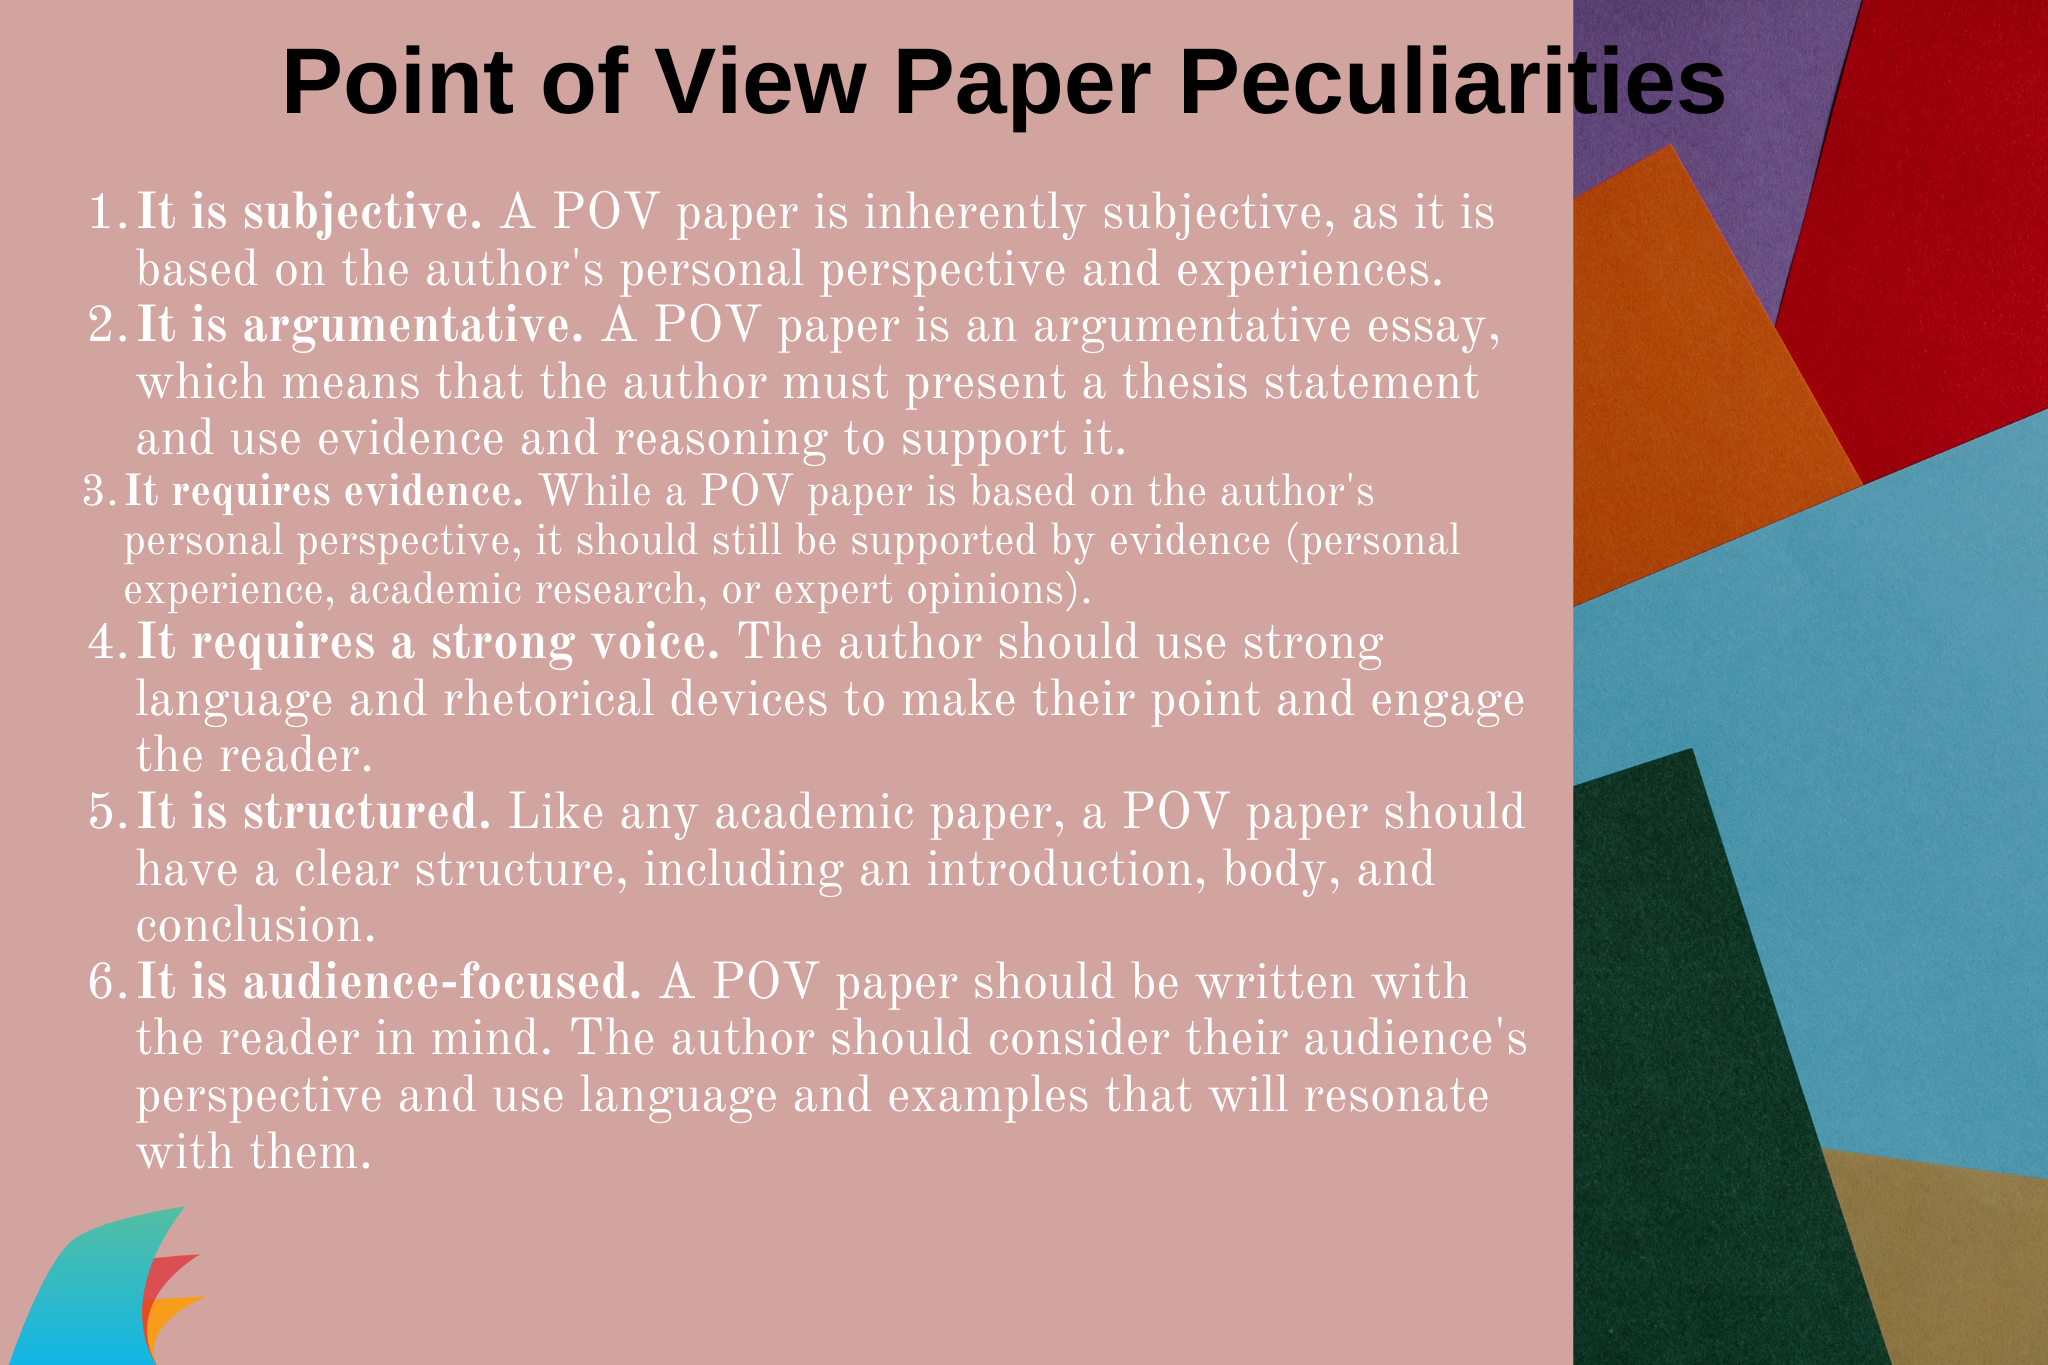 point of view paper peculiarities